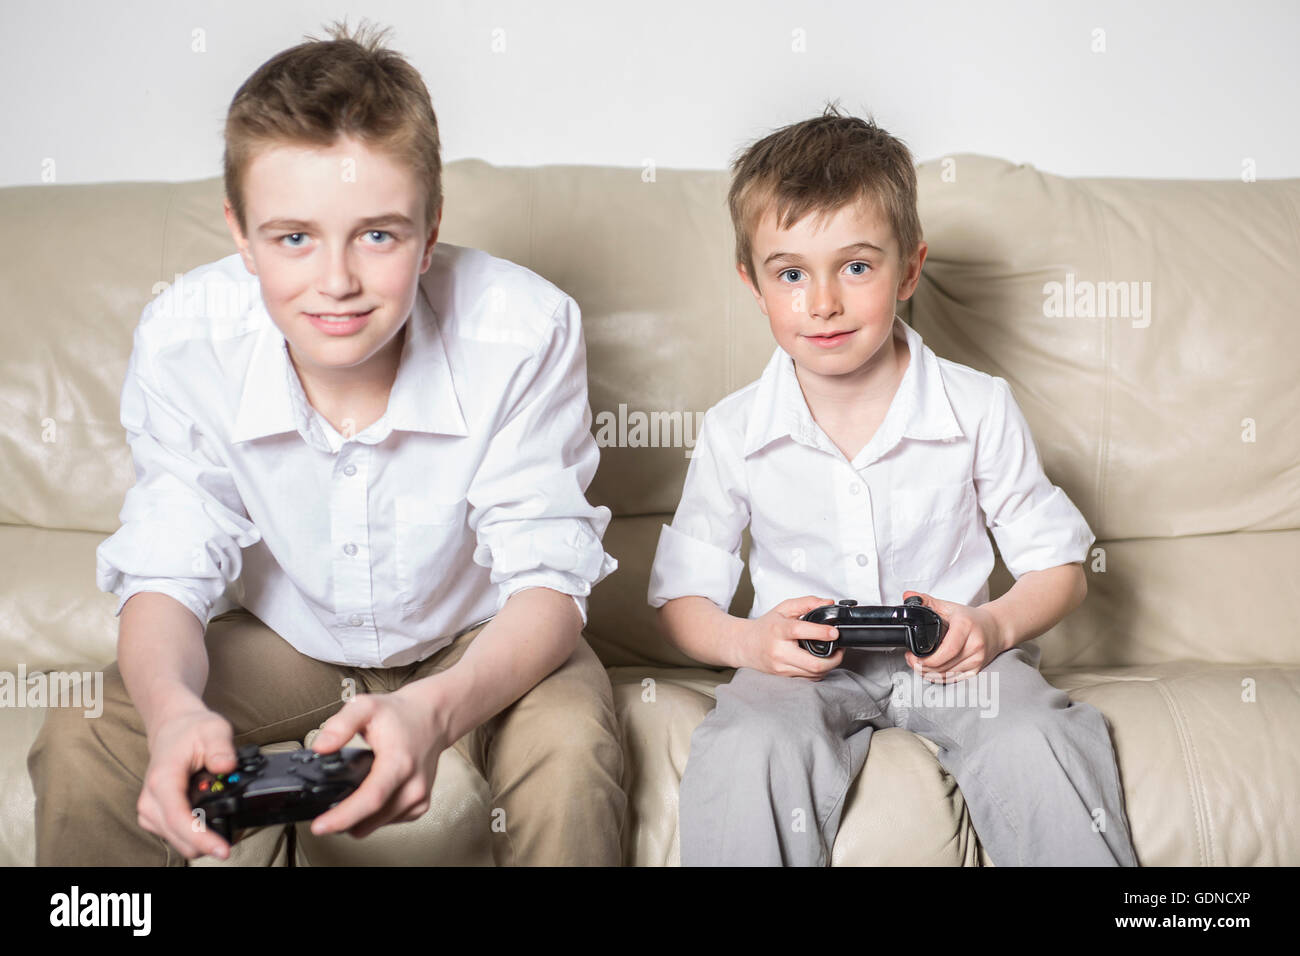 boys having lots of fun with video games Stock Photo